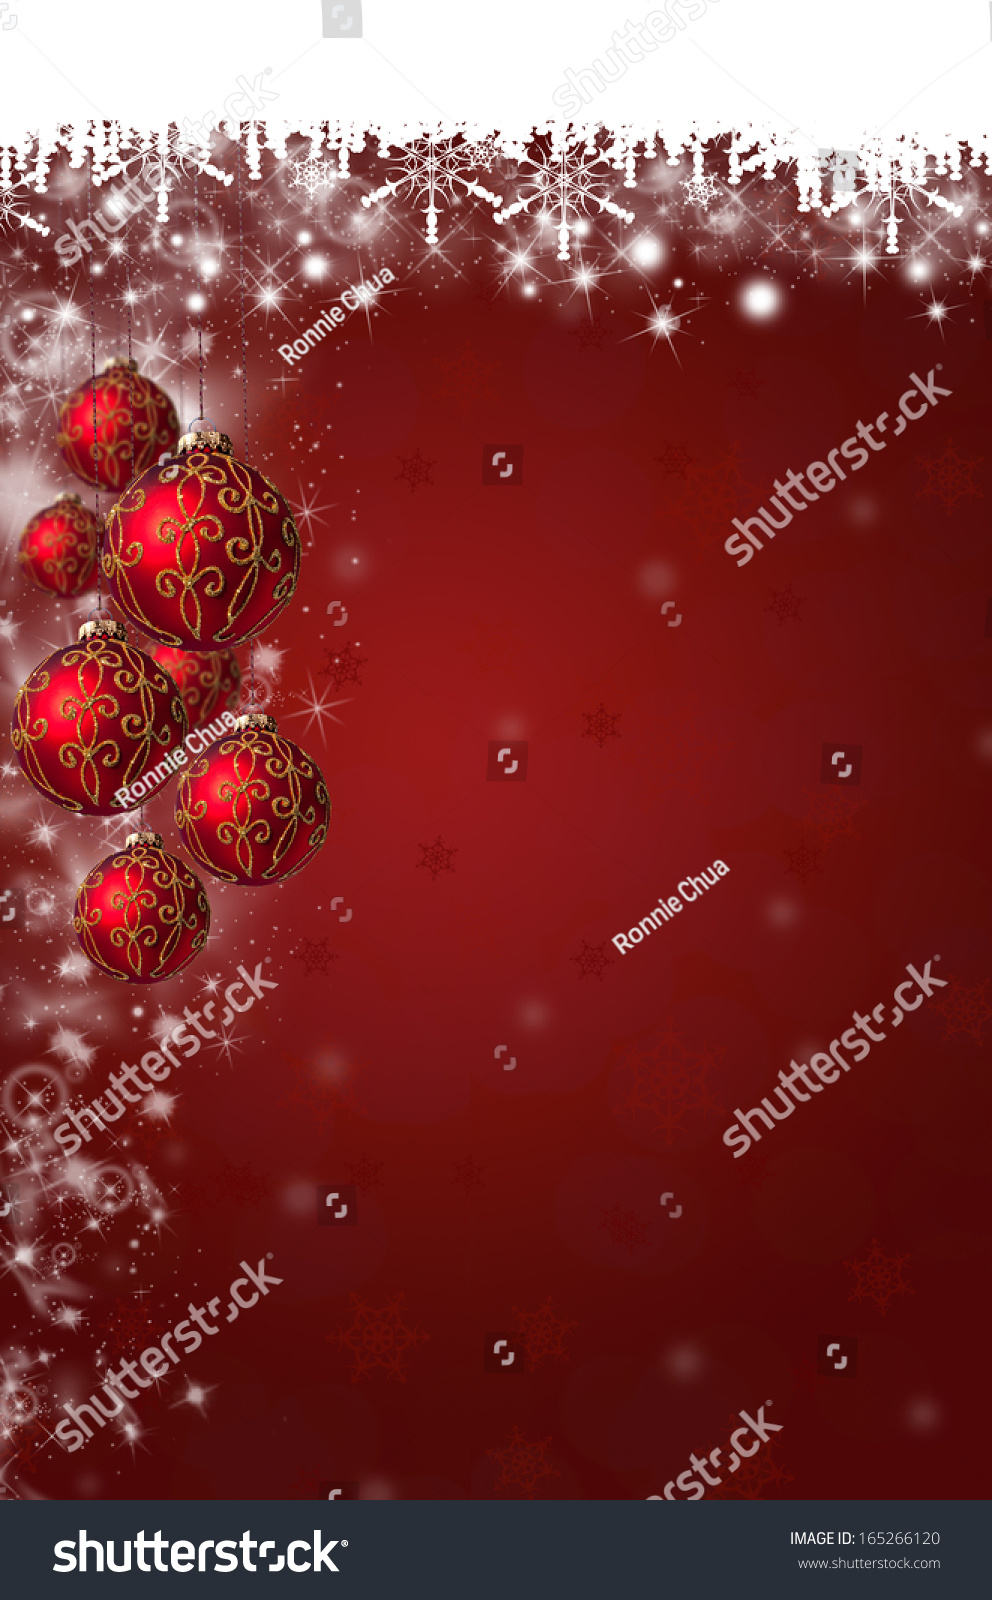 Snowflakes and Christmas Baubles Background in Red #165266120